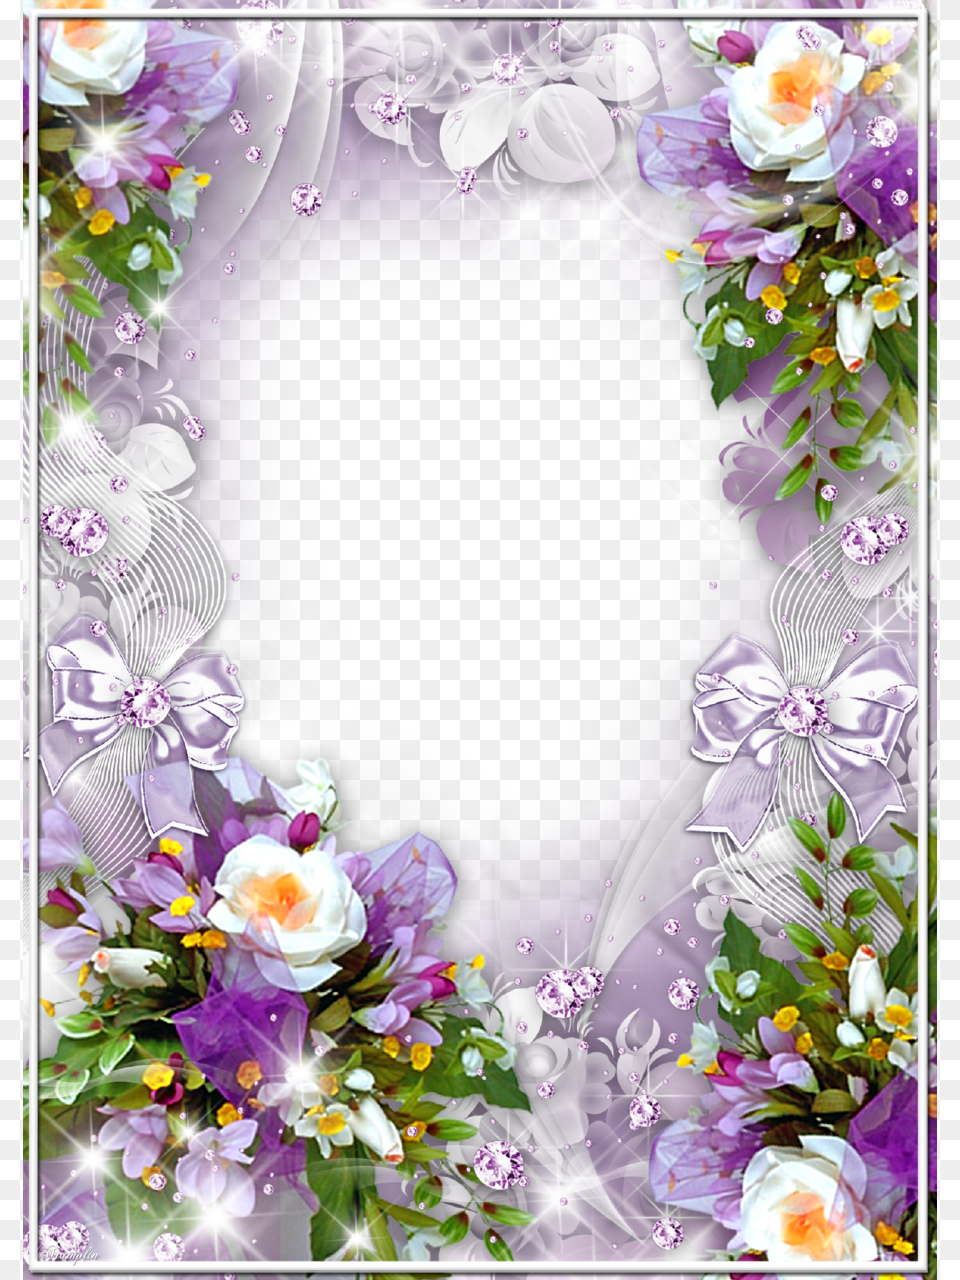 Flowers Gif Pink Roses Fractals Banners Stationary Photography, Graphics, Pattern, Floral Design, Purple Free Transparent Png